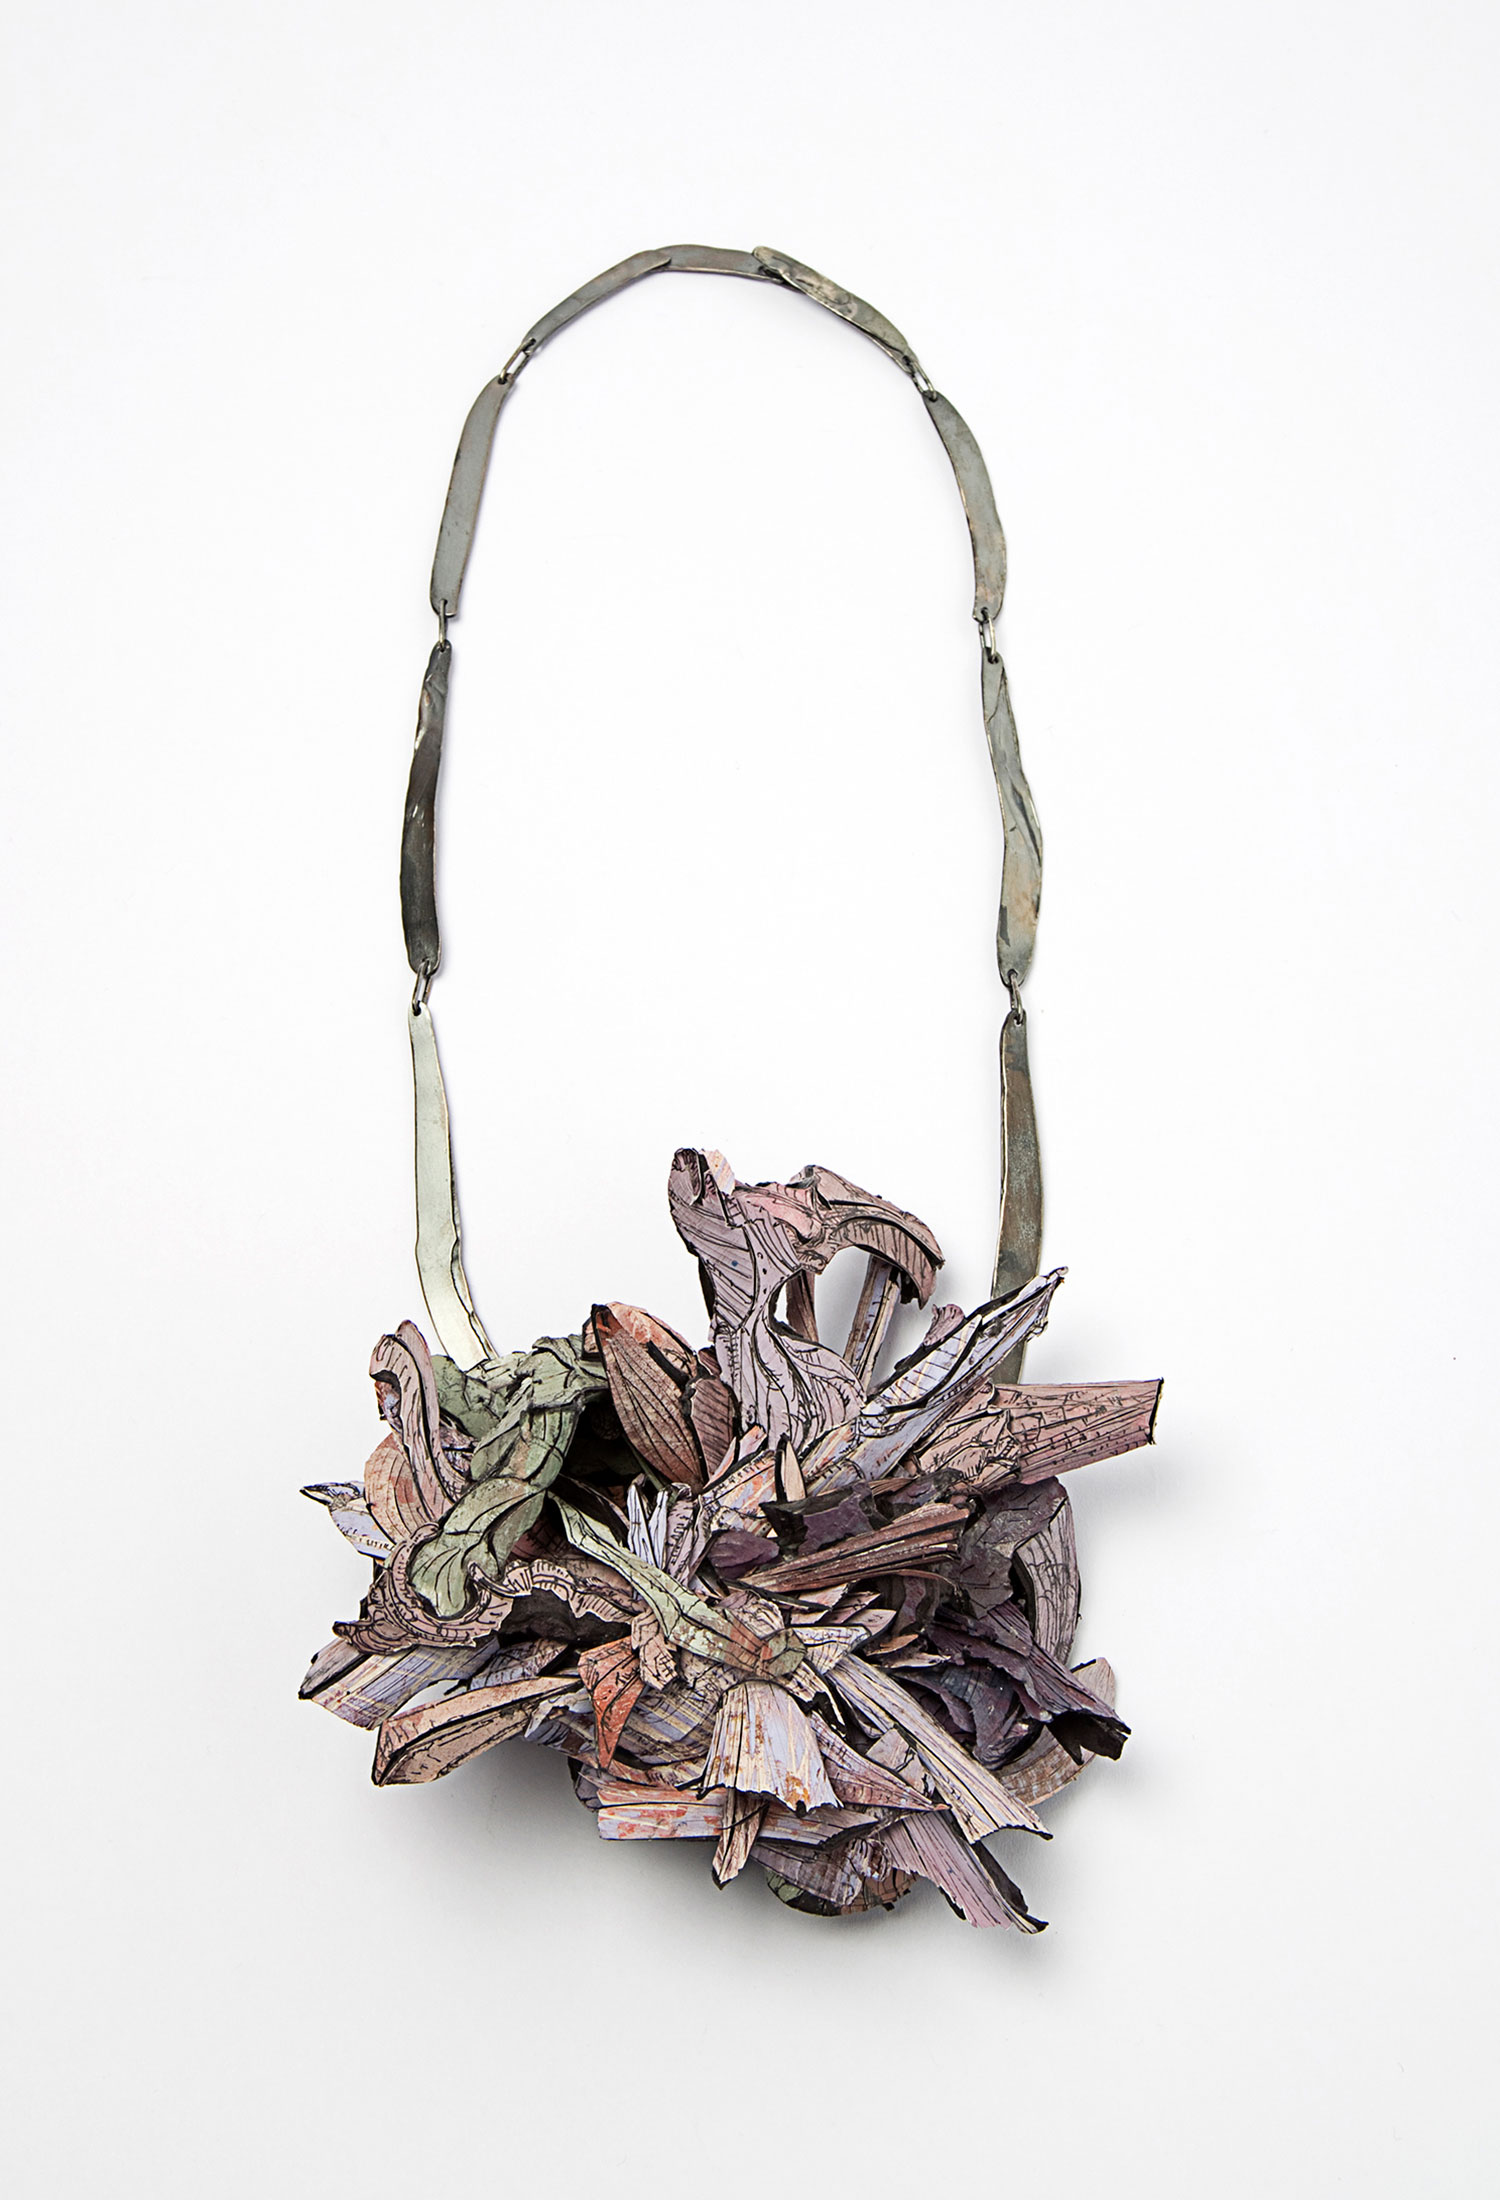 Untitled    |  Pendant  |    2015    |  Treated cellulose, paint, glue, coal, silver  | 280X150X70 mm